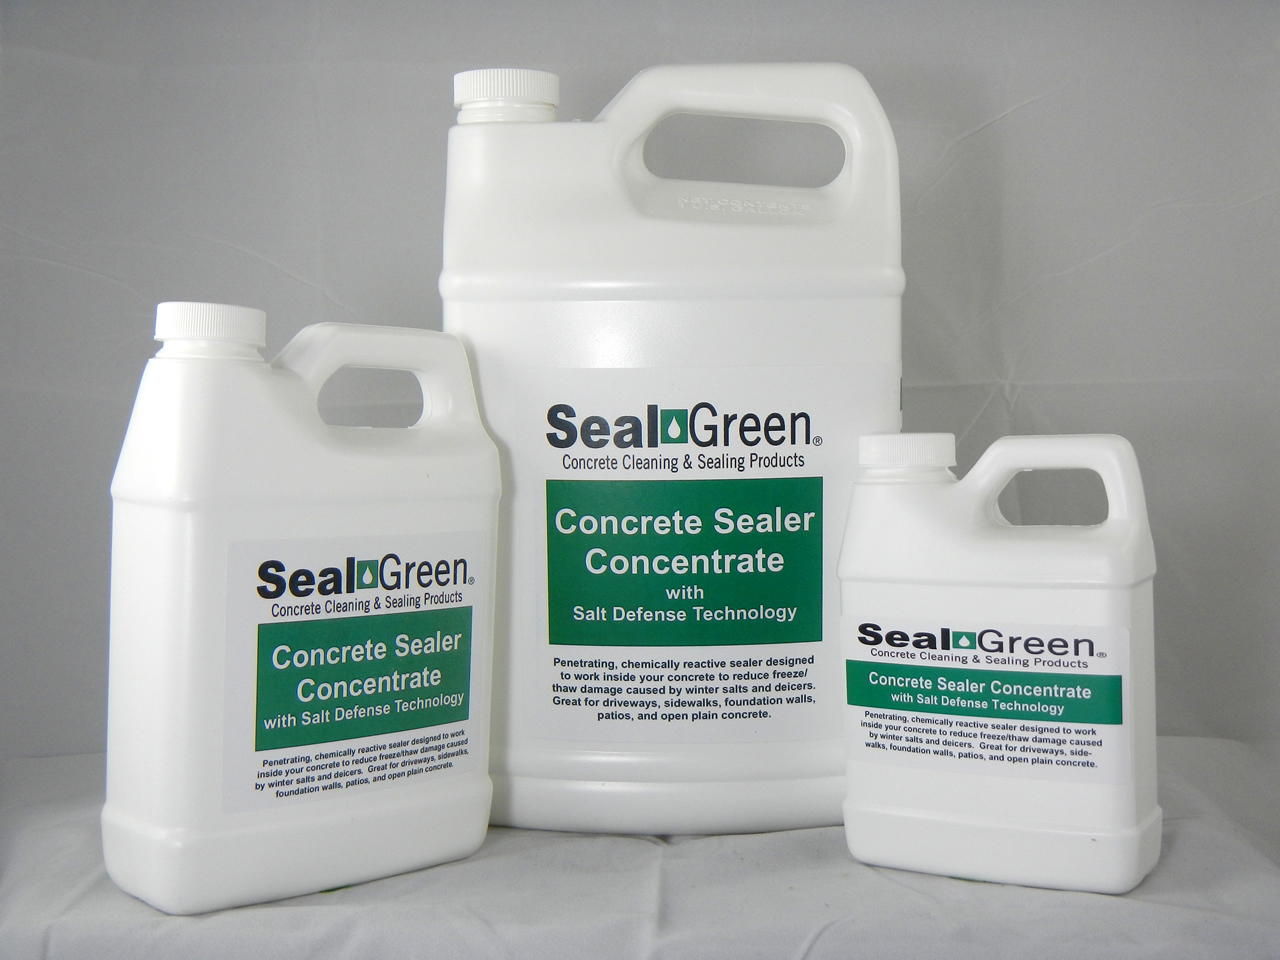 Is your concrete sealer low VOC? Can it be used indoors? Does efflorescence have to be removed first before use on